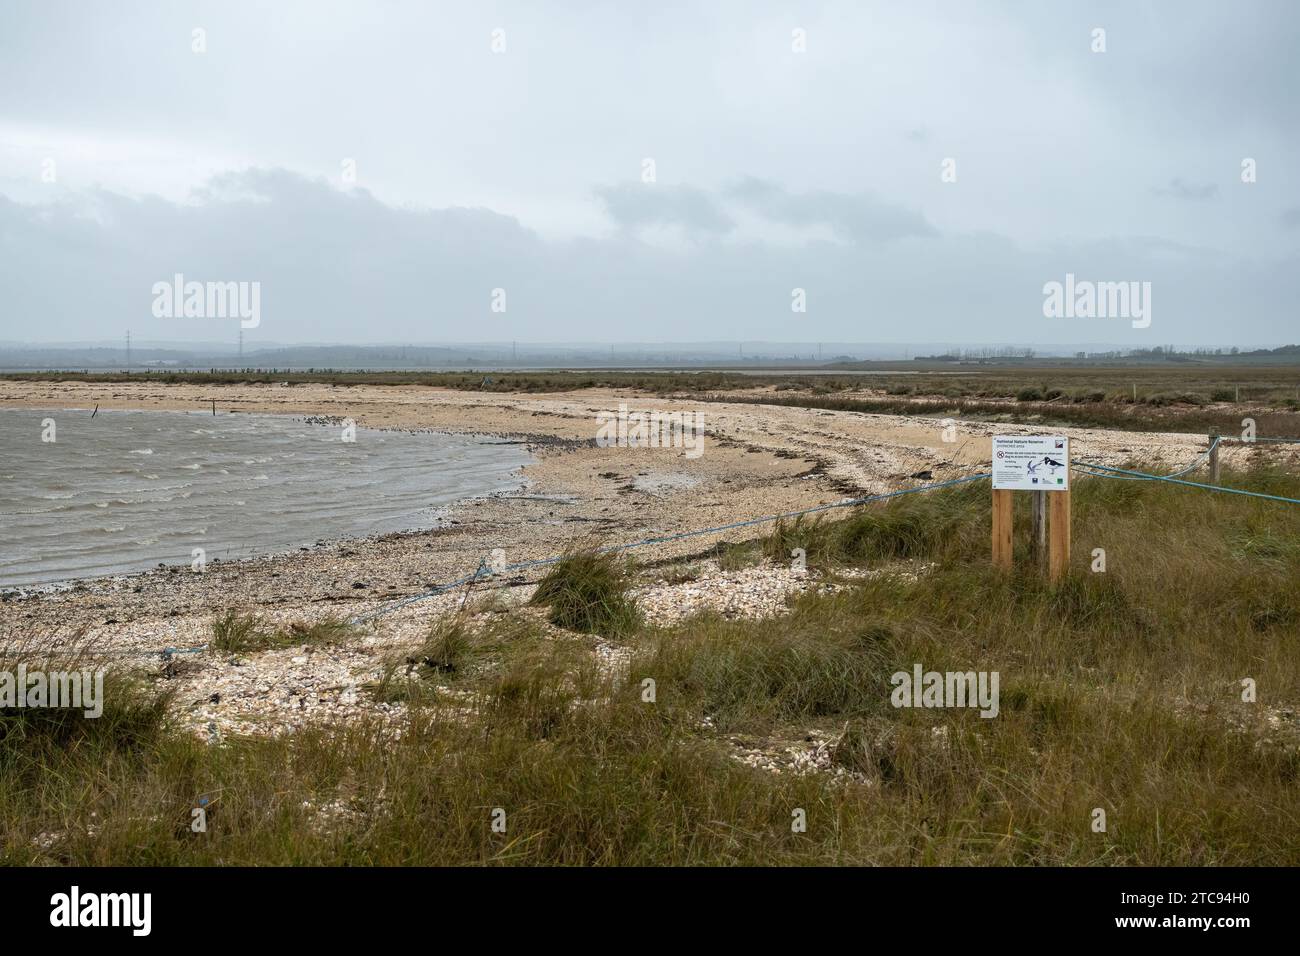 Swale National Nature Reserve, a coastal wildlife site on the Isle of Sheppey, Kent, England, UK, with flock of overwintering birds including dunlin Stock Photo